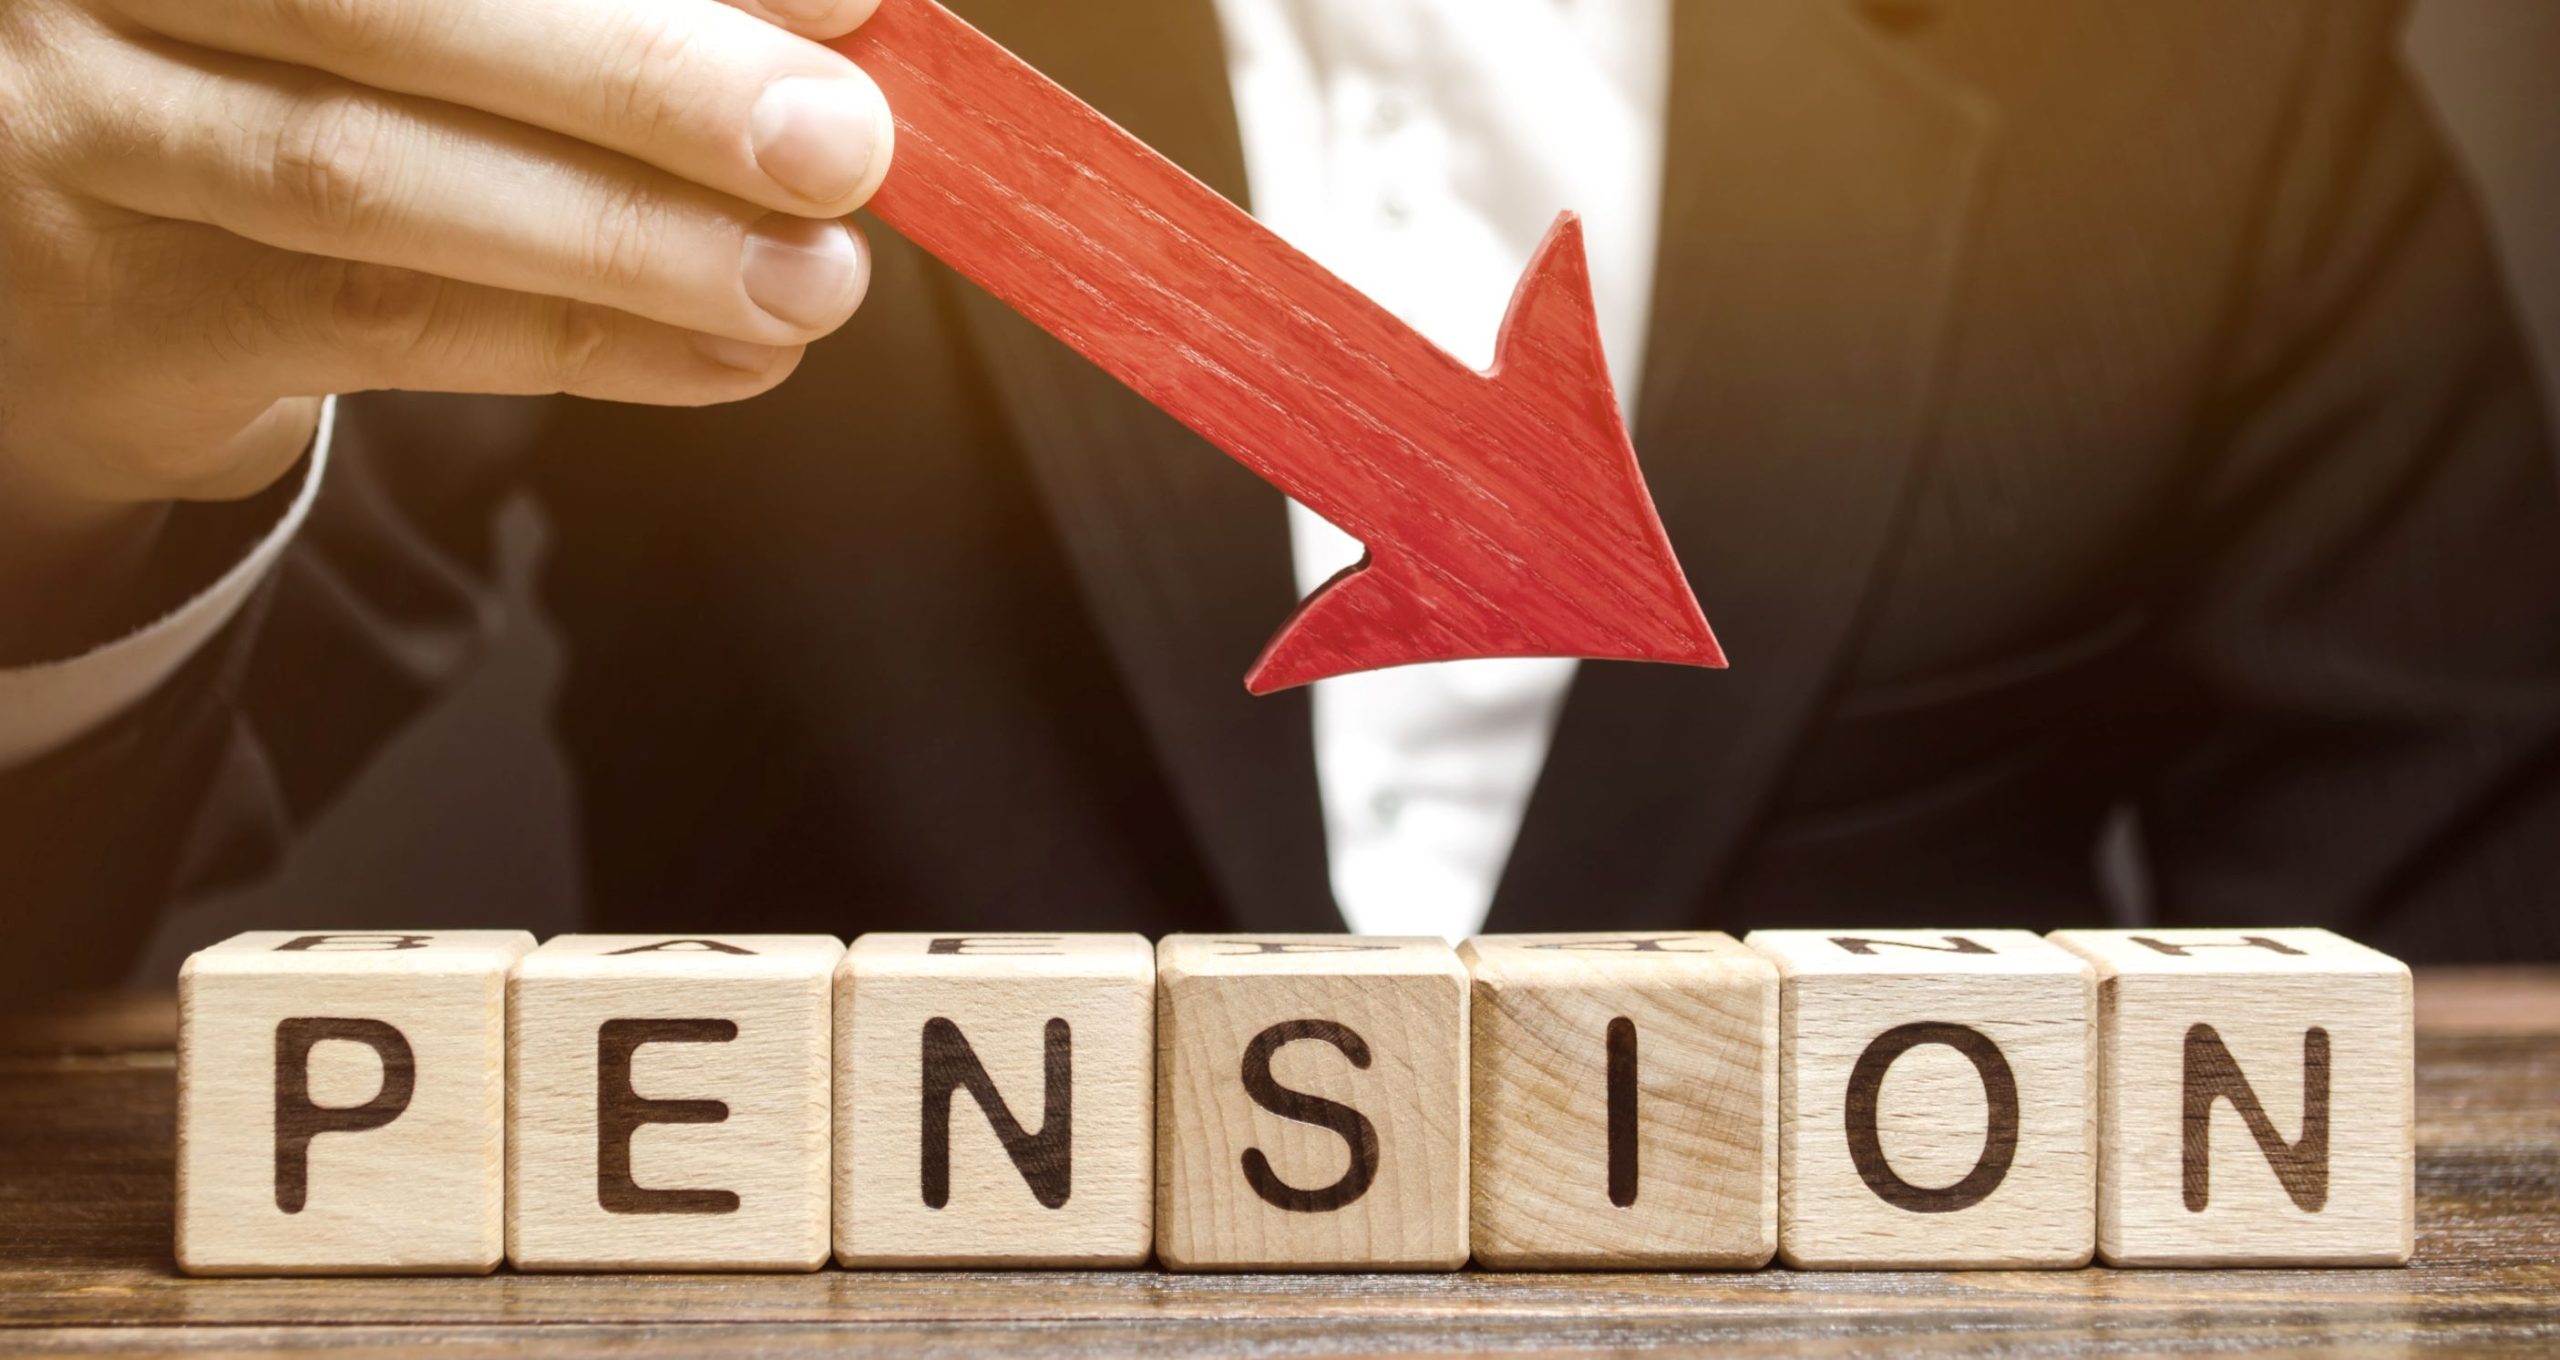 How Rising Interest Rates are Impacting Pension Decisions